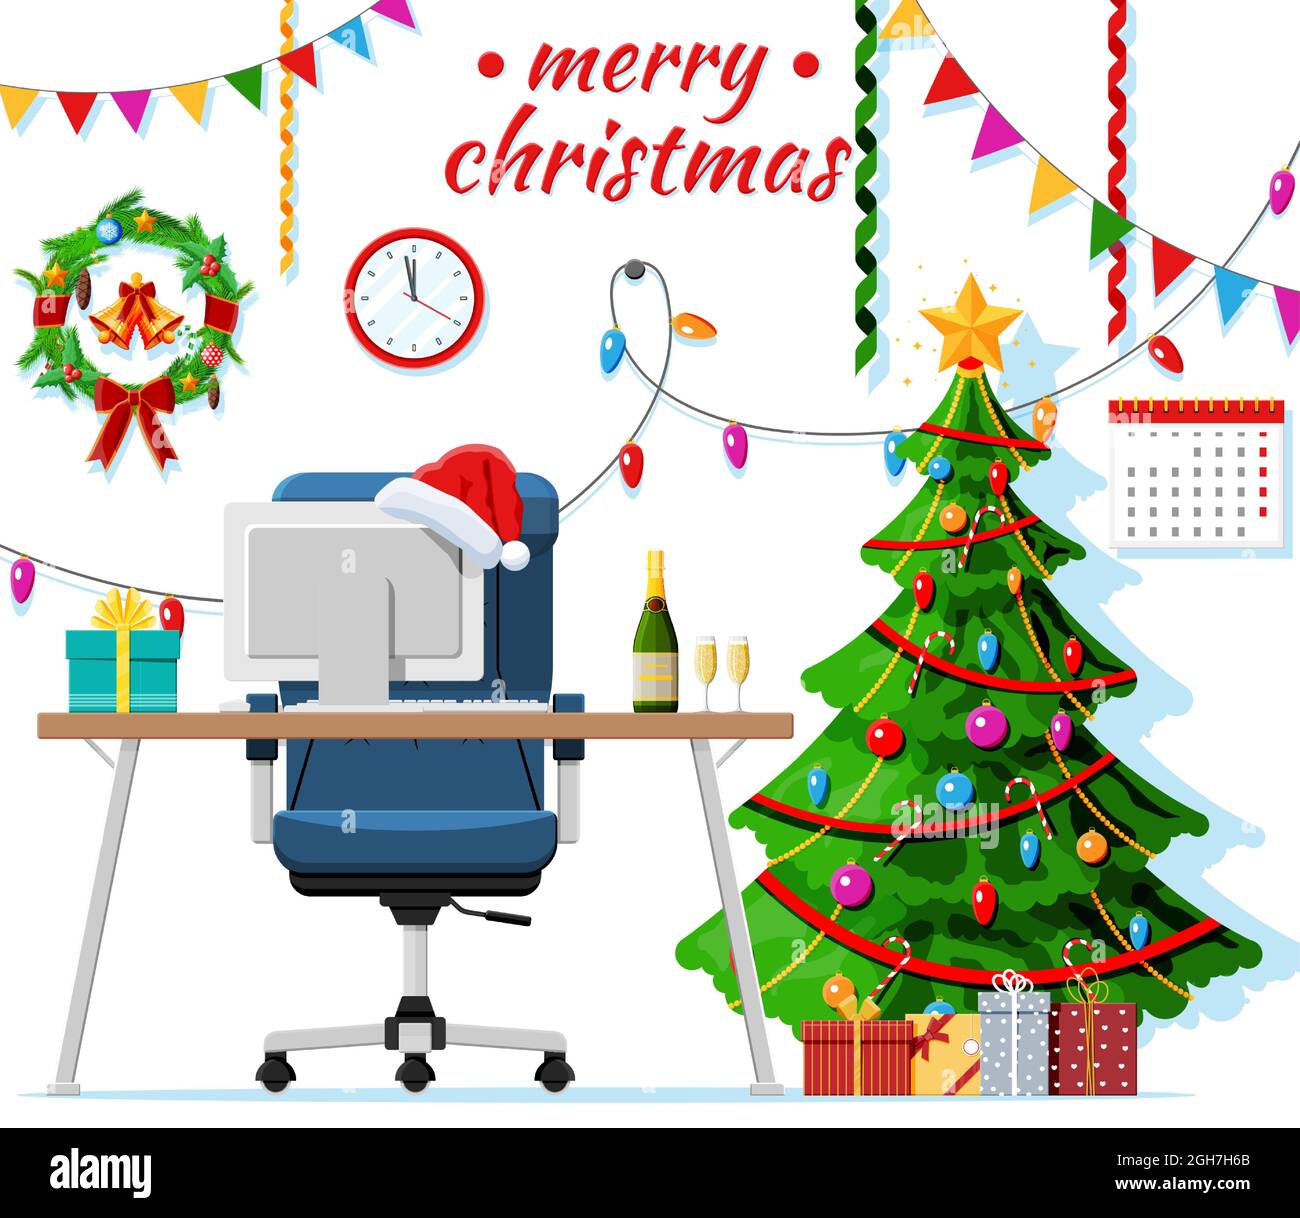 Christmas and New Year Office Desk Workspace Stock Vector Image ...